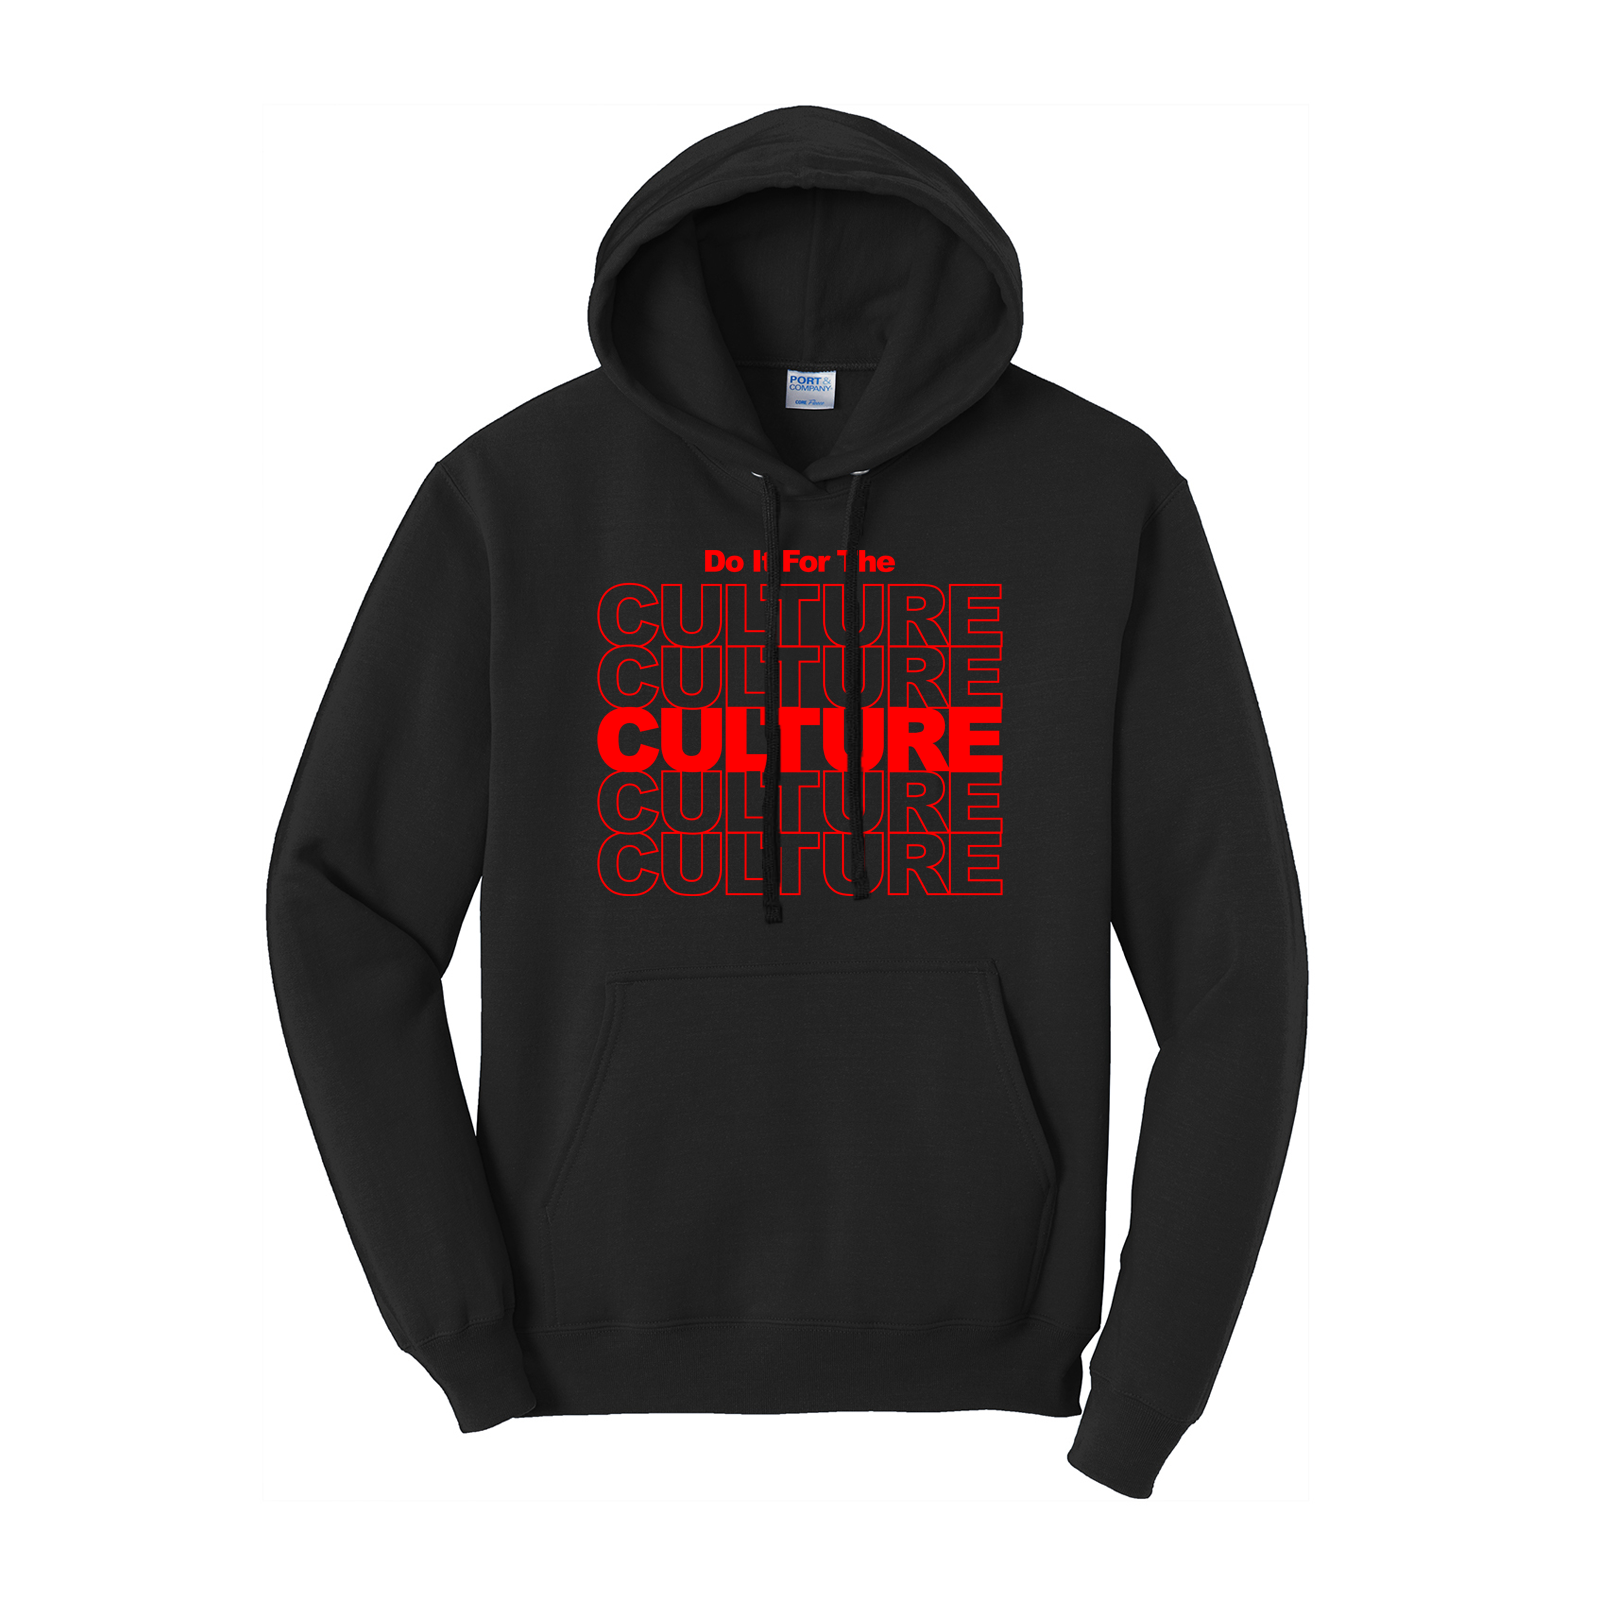 'Do It For The Culture' Men's Hoodie